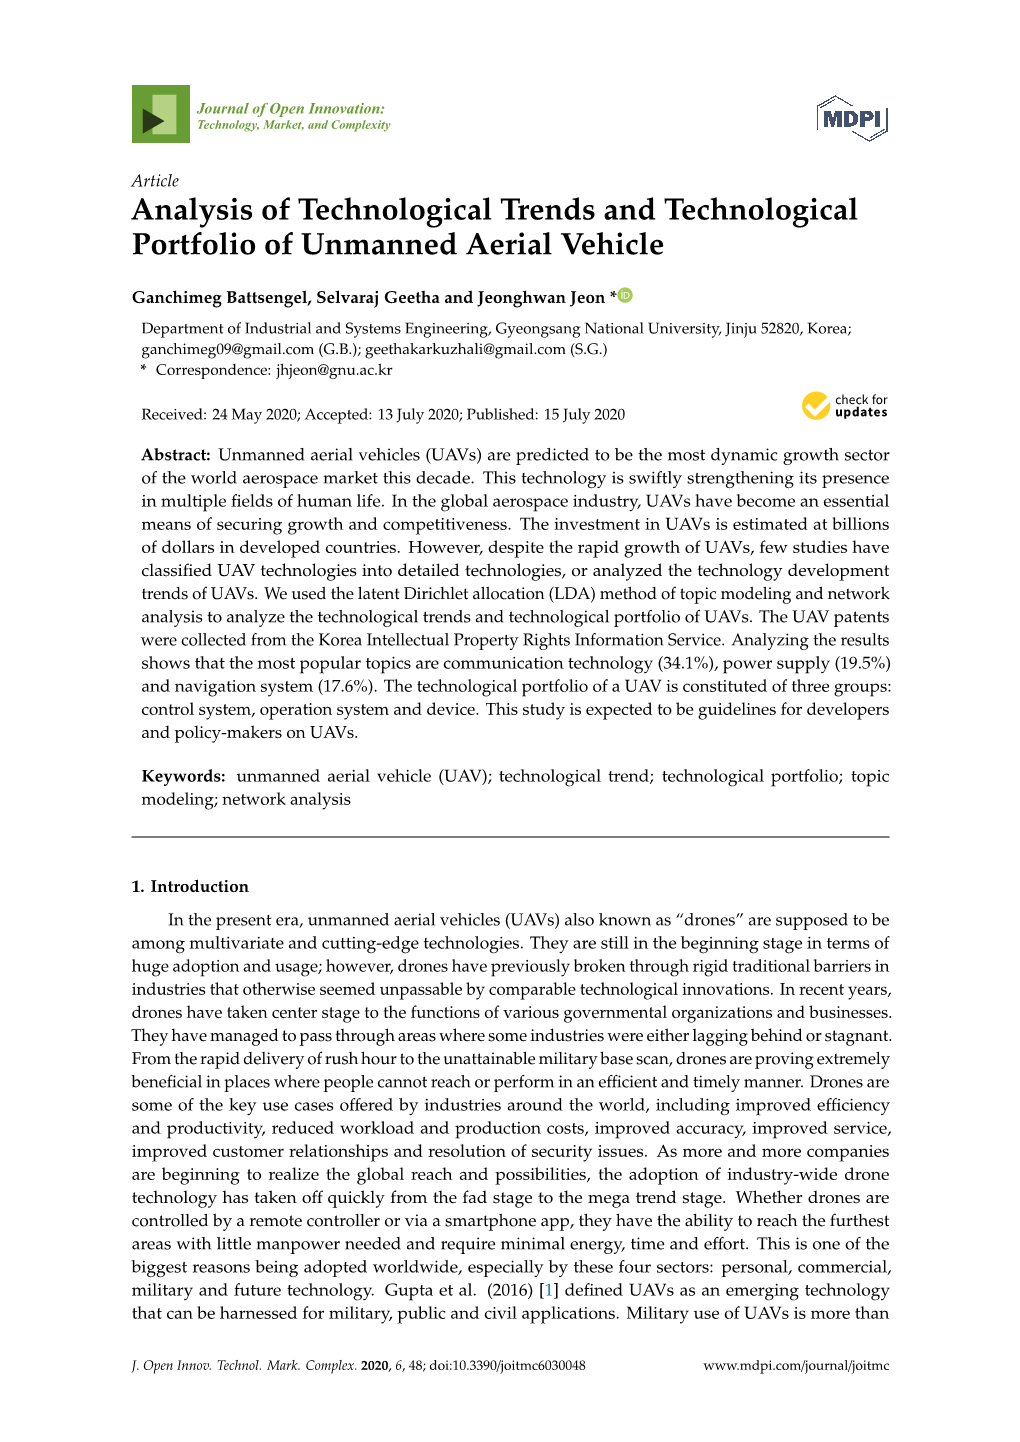 Analysis of Technological Trends and Technological Portfolio of Unmanned Aerial Vehicle